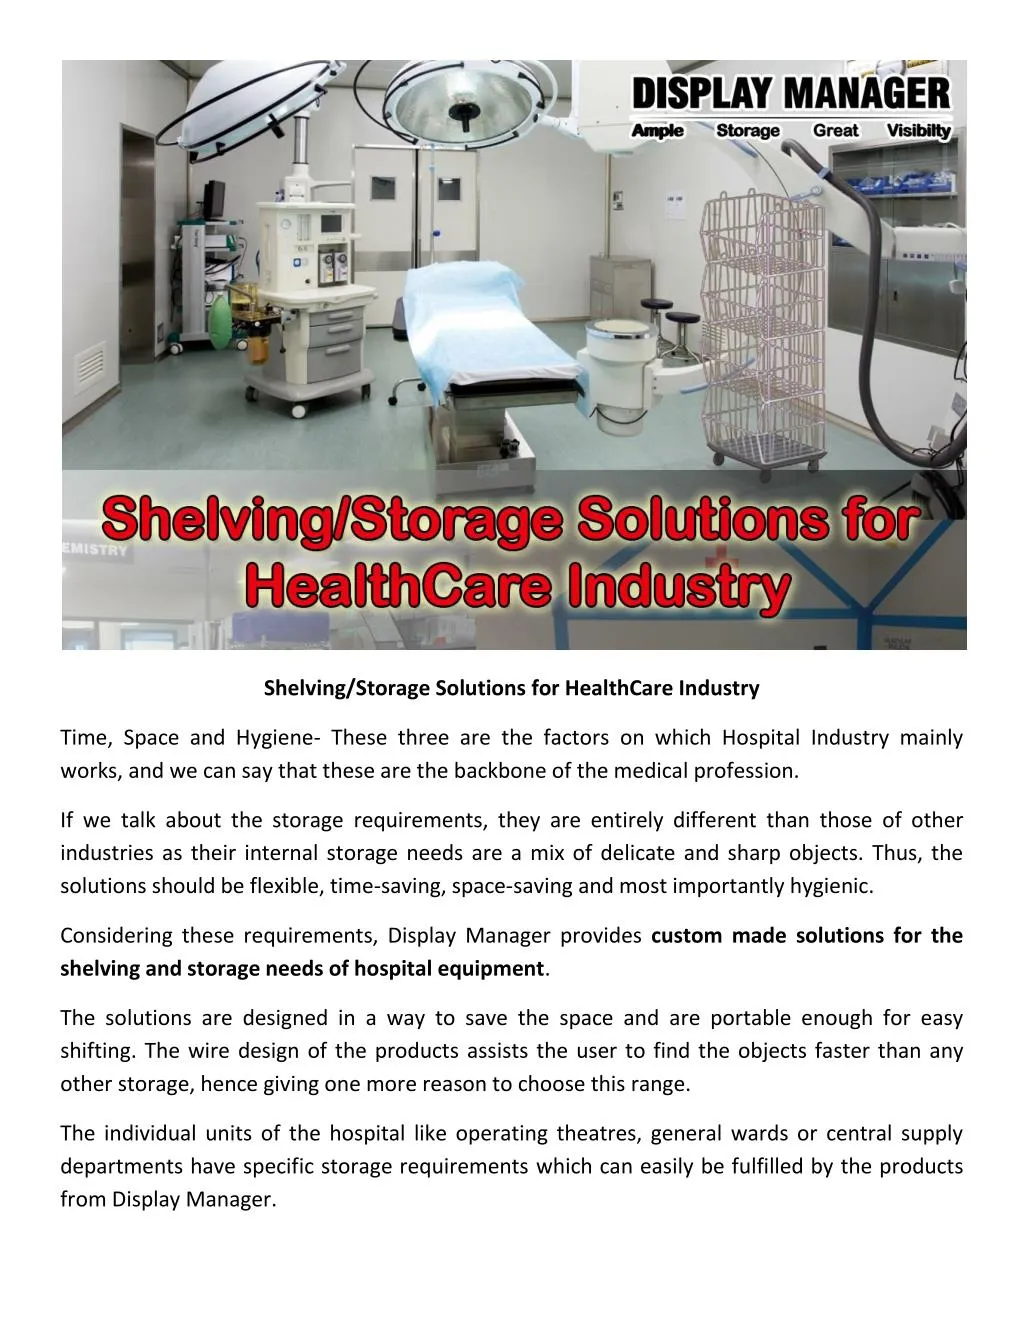 shelving storage solutions for healthcare industry